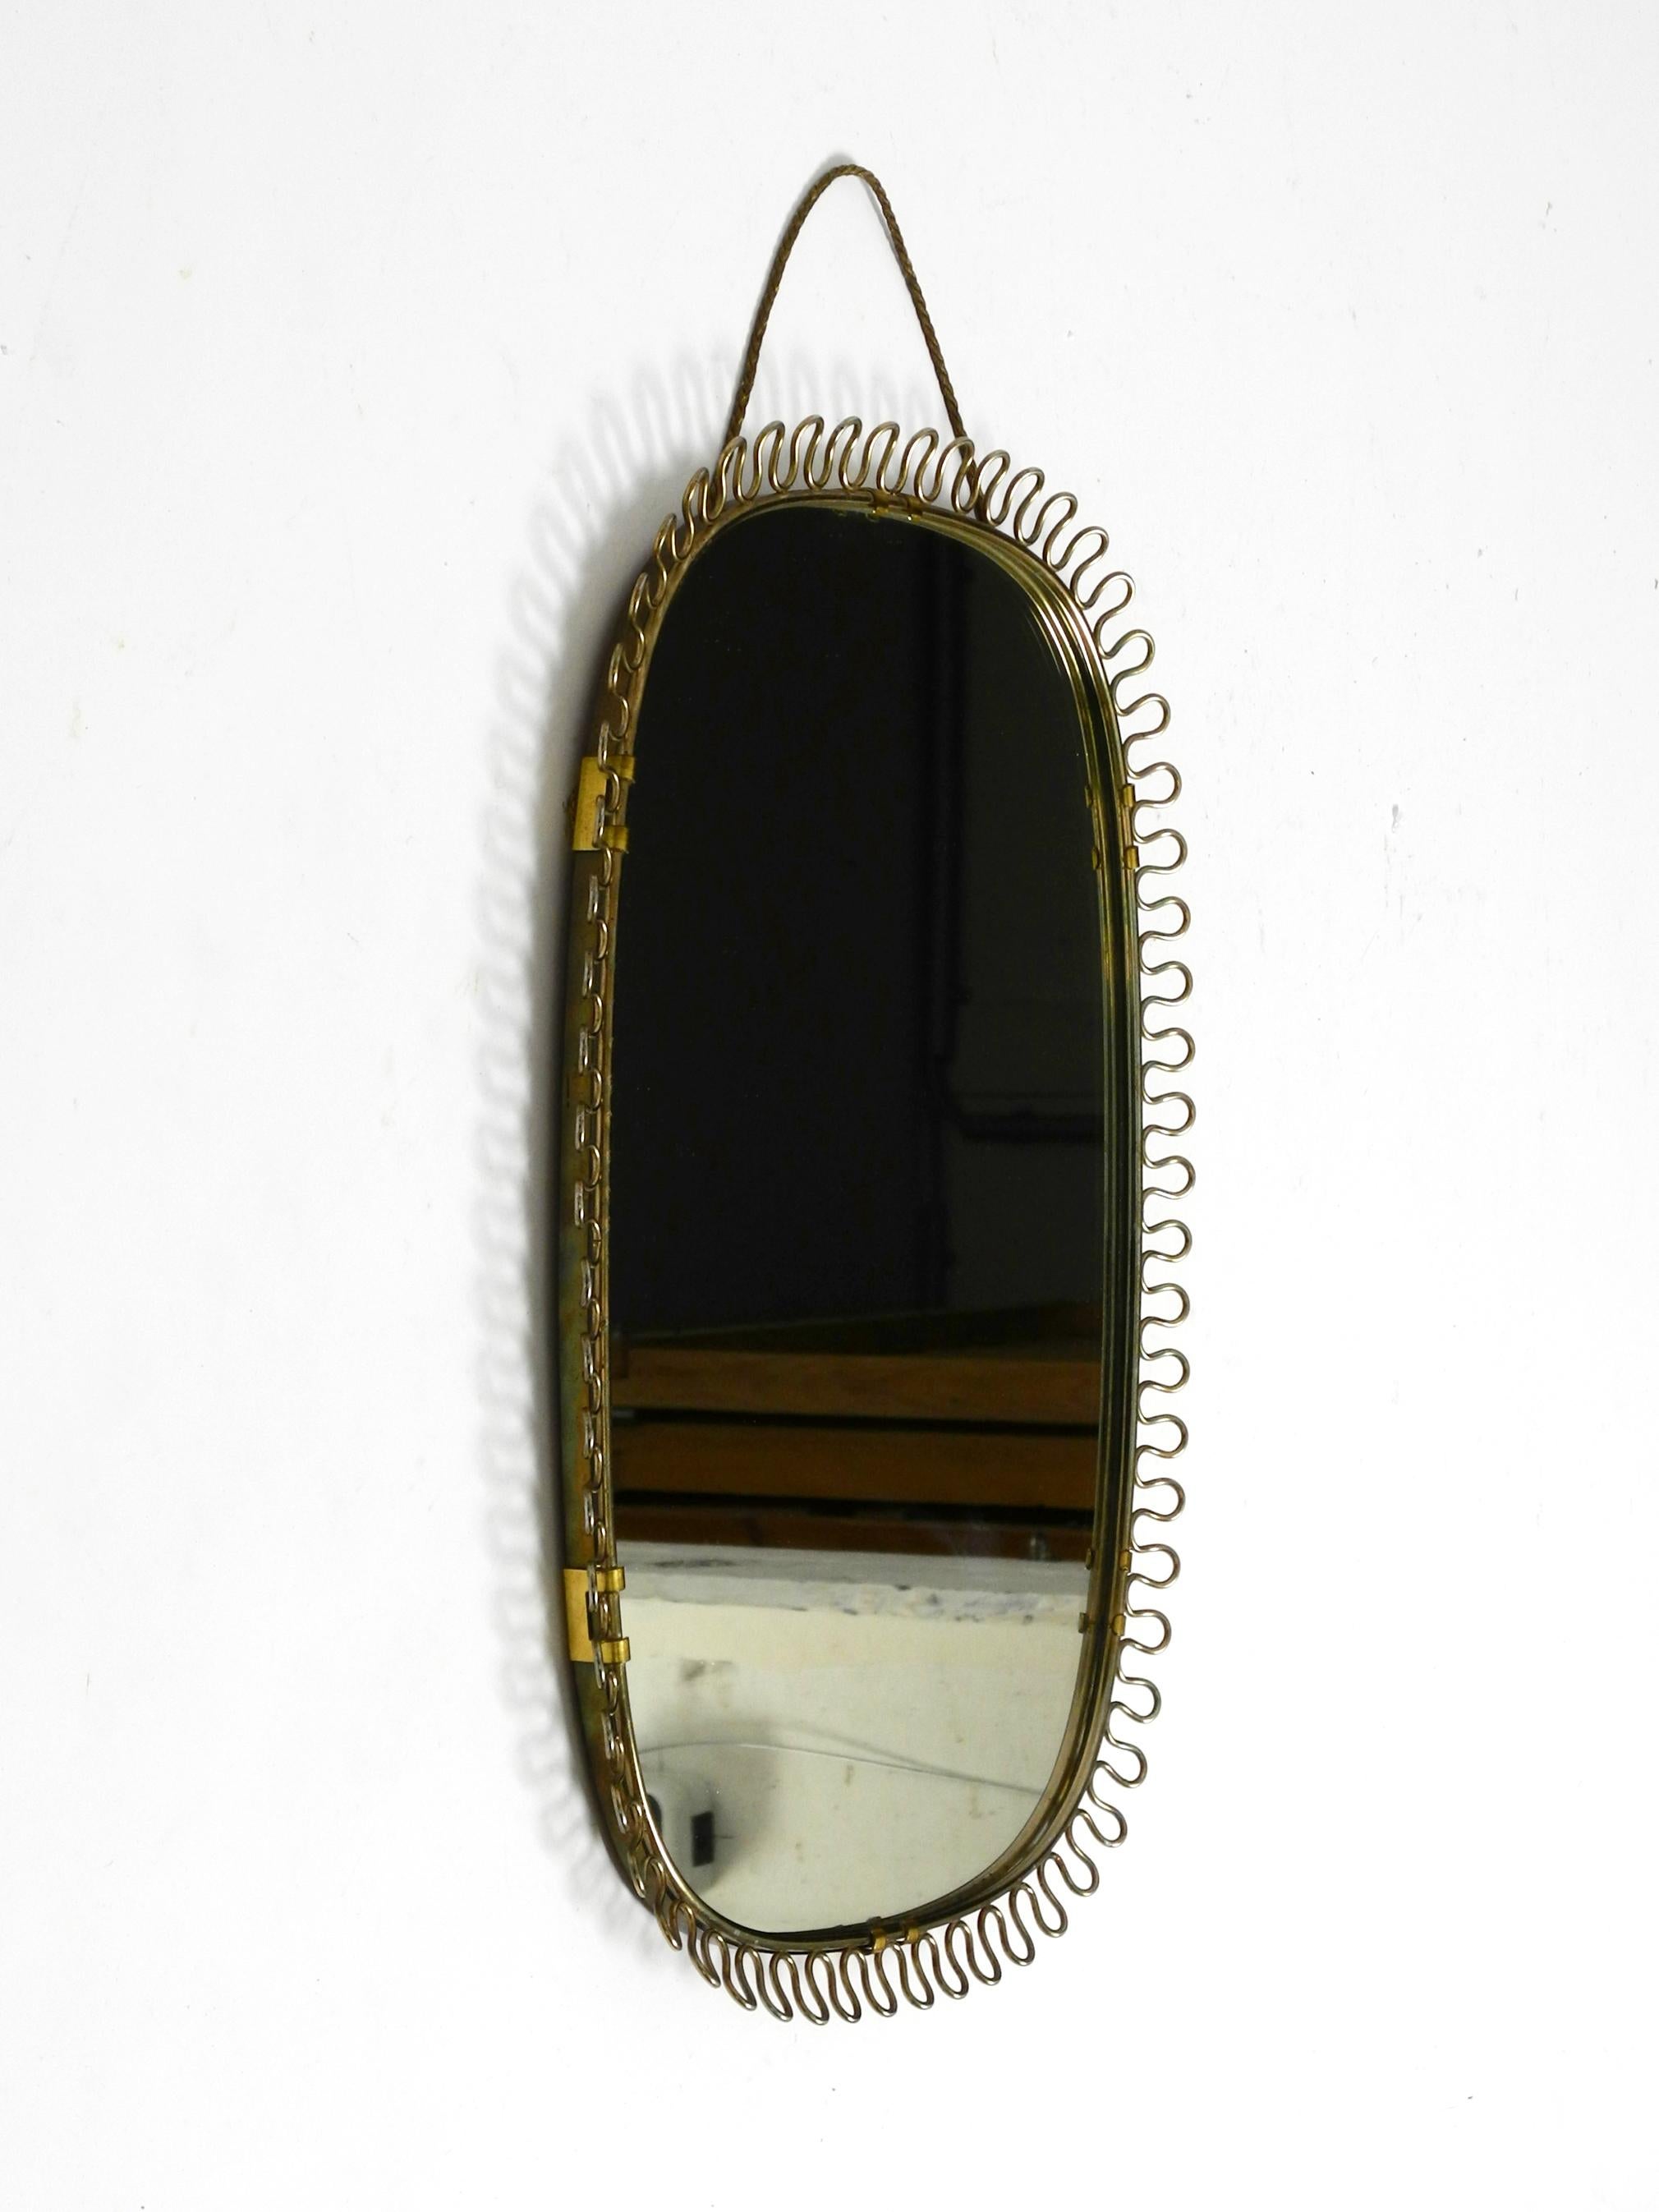 Small, heavy Mid Century wall mirror with a frame with gold colored metal loops 11